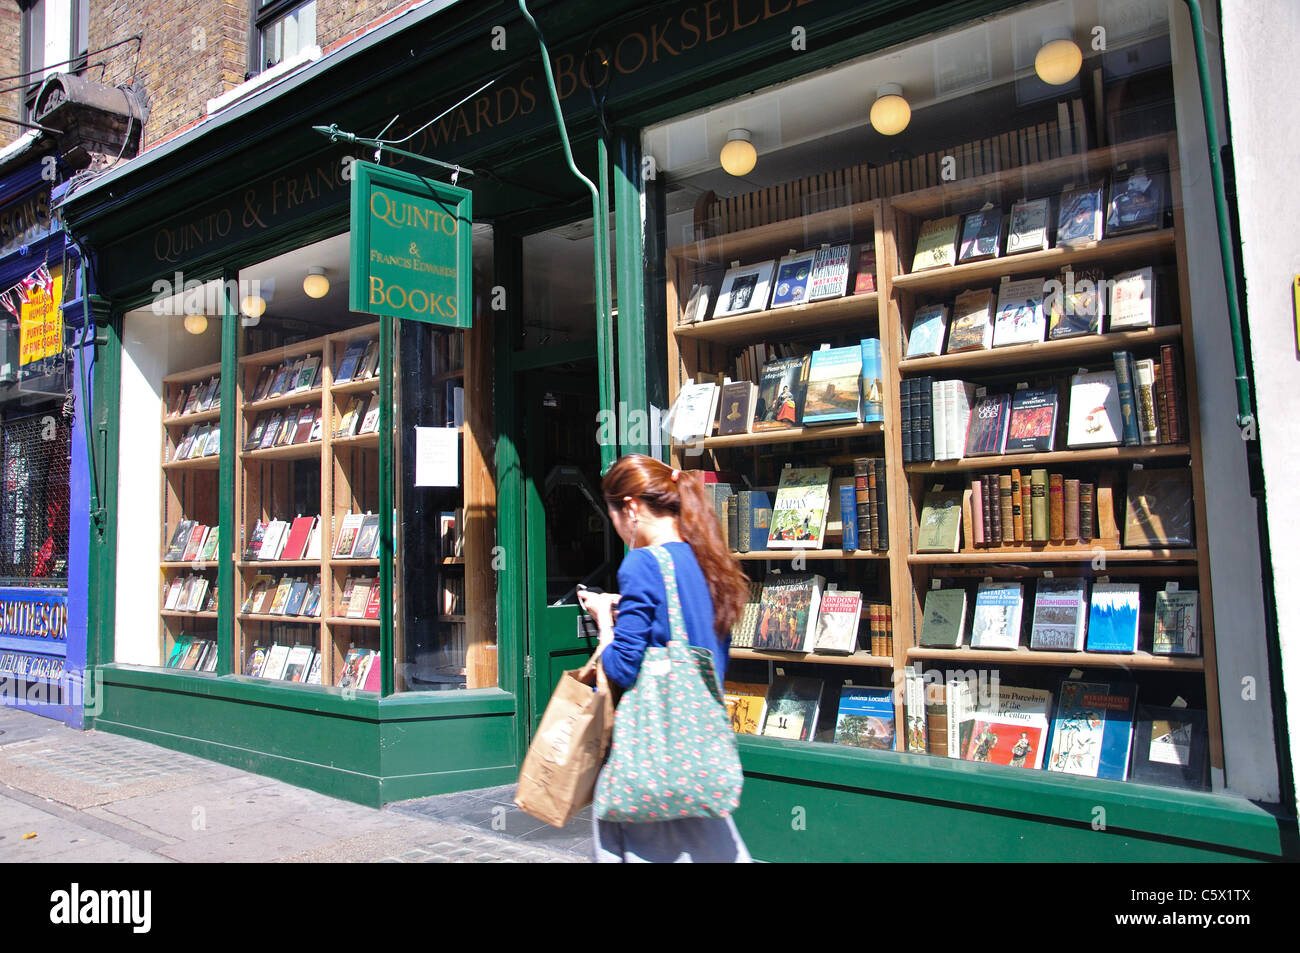 Quinto Books, Charing Cross Road, Covent Garden, City of Westminster, London, Greater London, England, United Kingdom Stock Photo